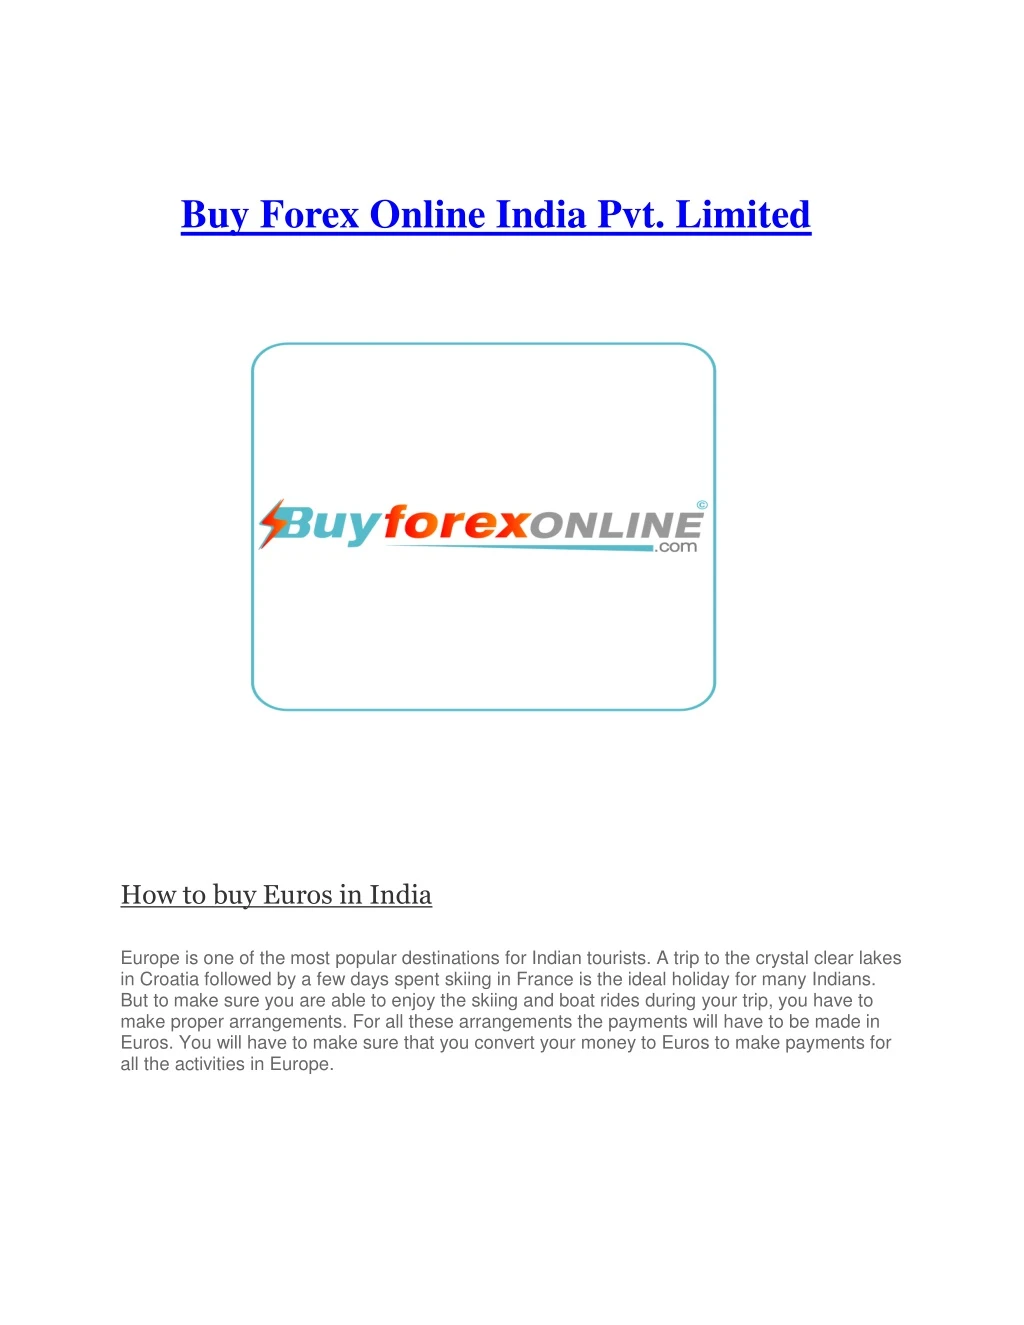 buy forex online india pvt limited